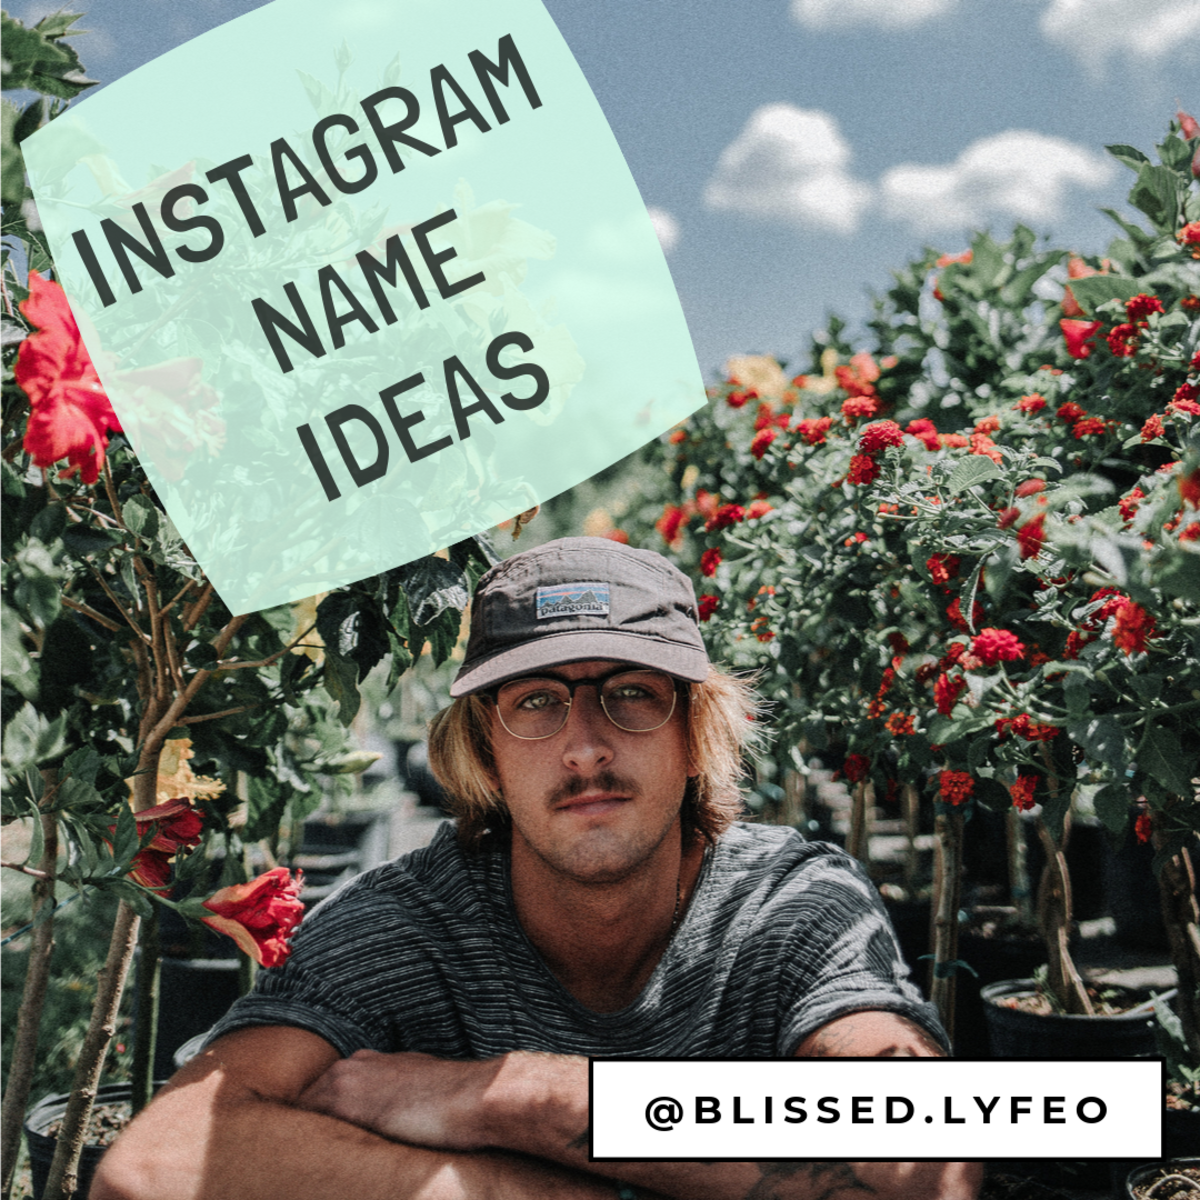 200 Creative Instagram Name Ideas And Handles For Insta Fame